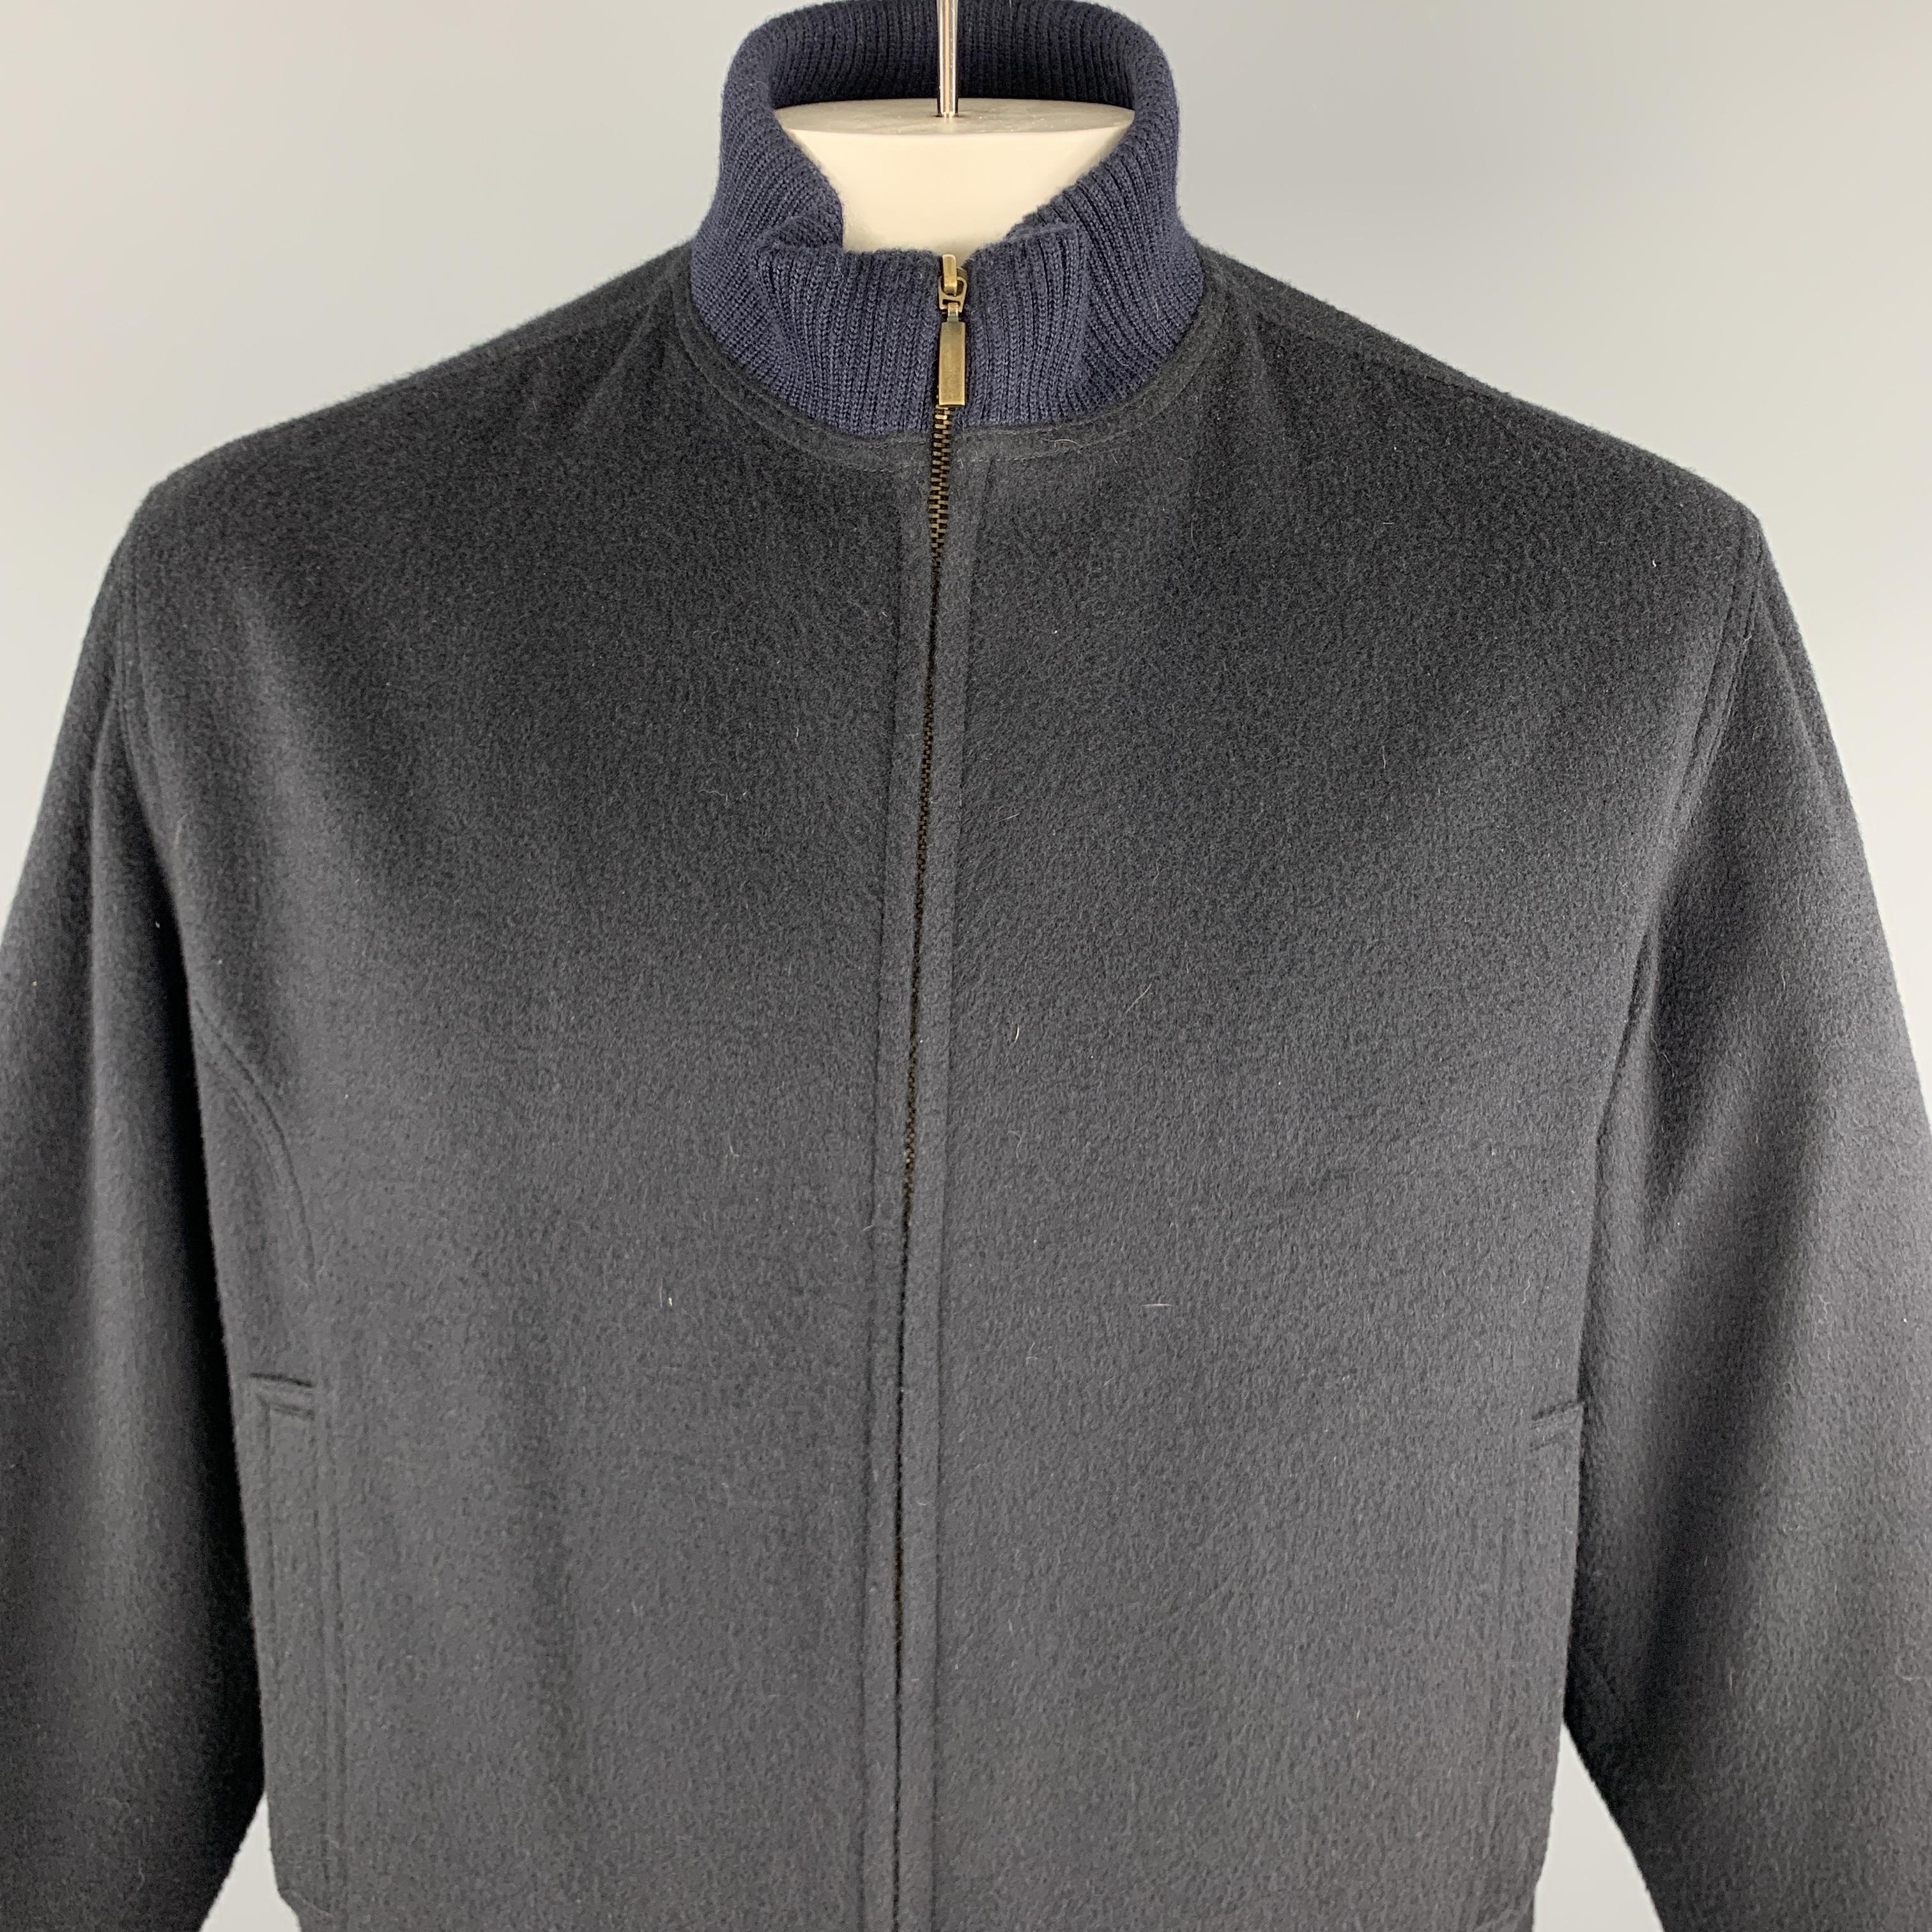 PIER LUIGI DELLA SPINA jacket comes in a navy cashmere featuring a high ribbed collar and a full zip closure. Made in Italy.

Excellent Pre-Owned Condition.
Marked:

Measurements:

Shoulder: 18 in. 
Chest: 46 in.
Sleeve: 24.5 in. 
Length: 26 in. 